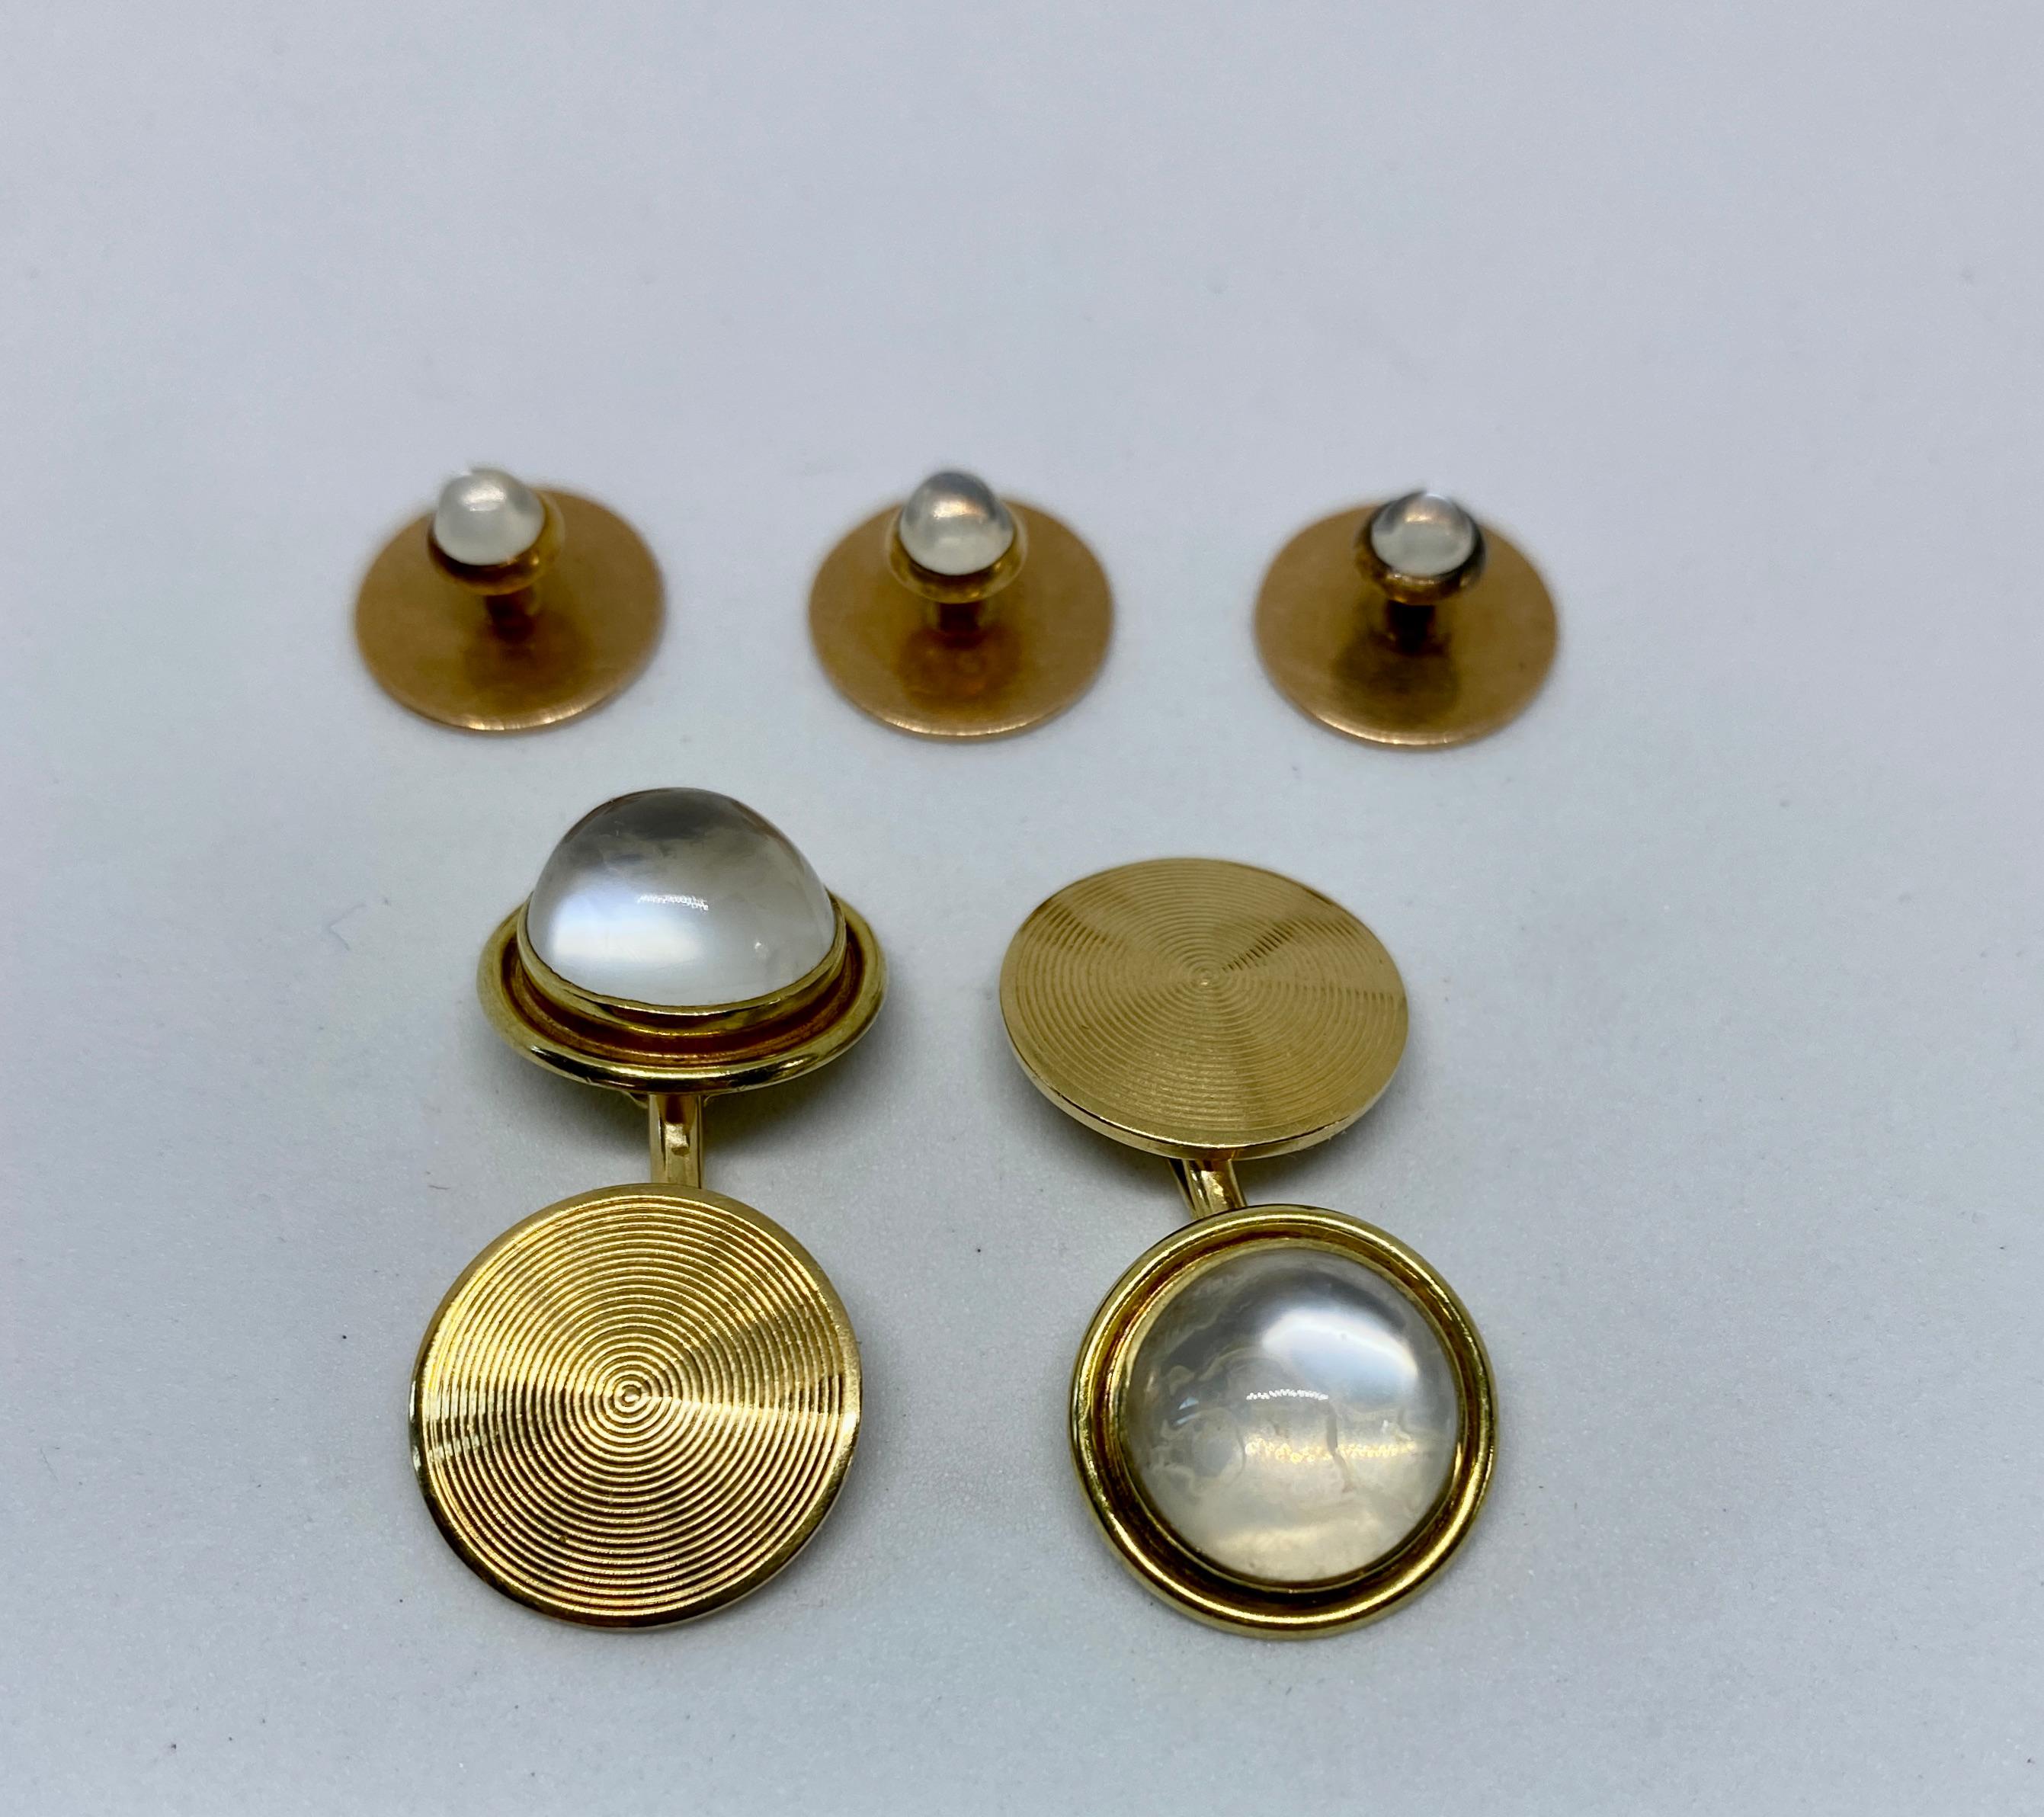 A truly exceptional set of cufflinks and three shirt studs featuring spiral-engraved yellow gold and cabochon-cut moonstones made in the early 20th Century by the highly respected American firm of Sansbury & Nellis.

The cufflinks each boast two